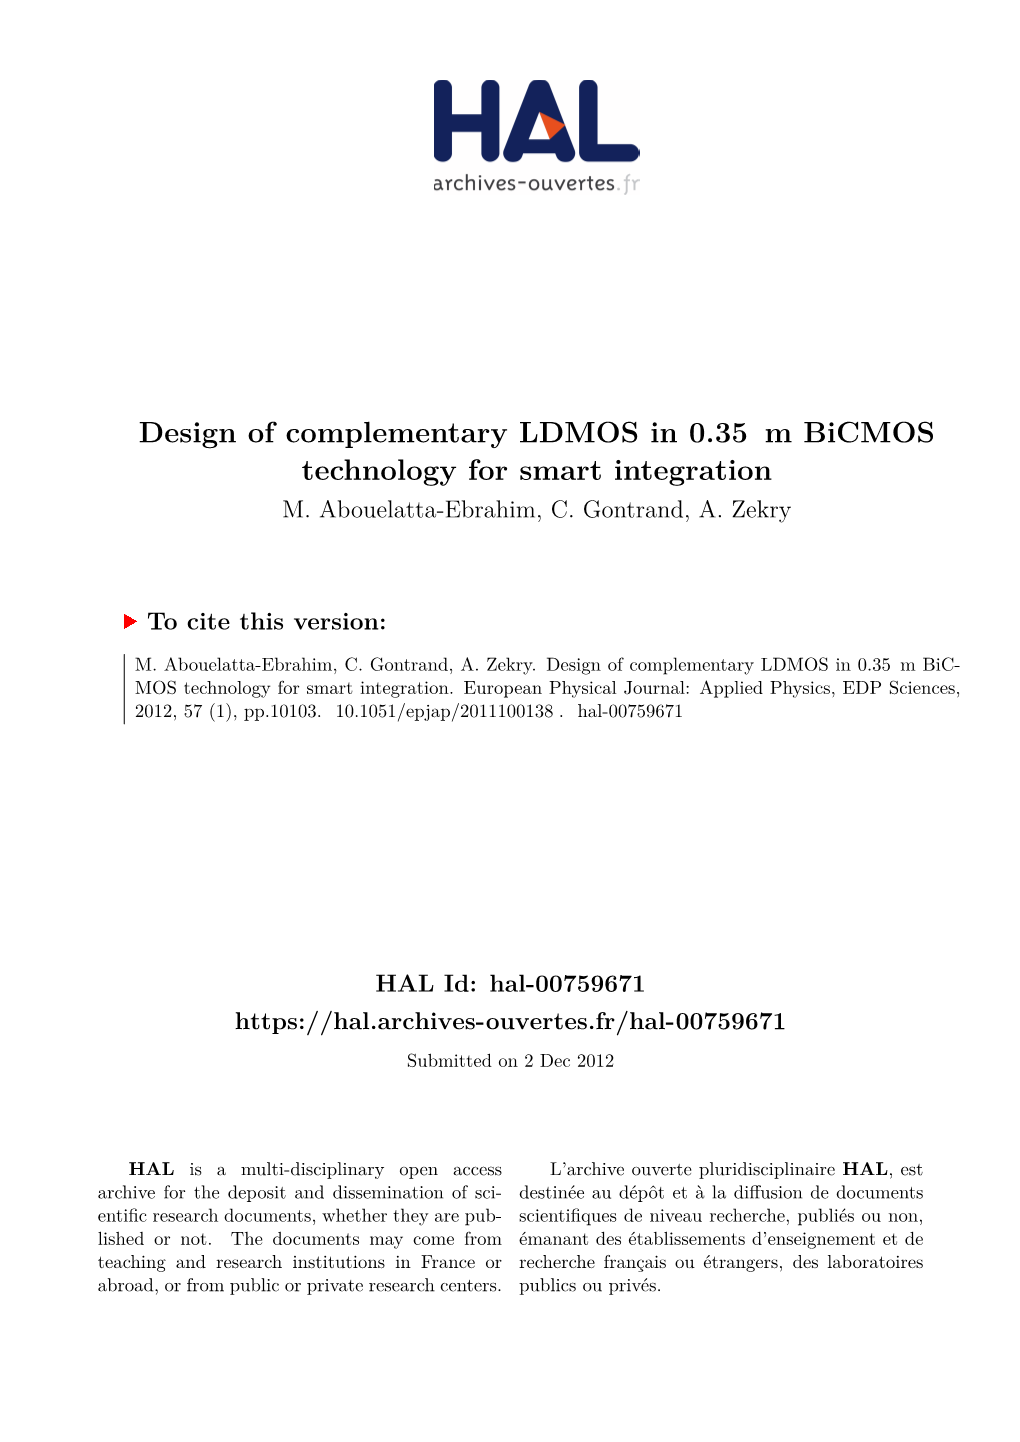 Design of Complementary LDMOS in 0.35 M Bicmos Technology for Smart Integration M